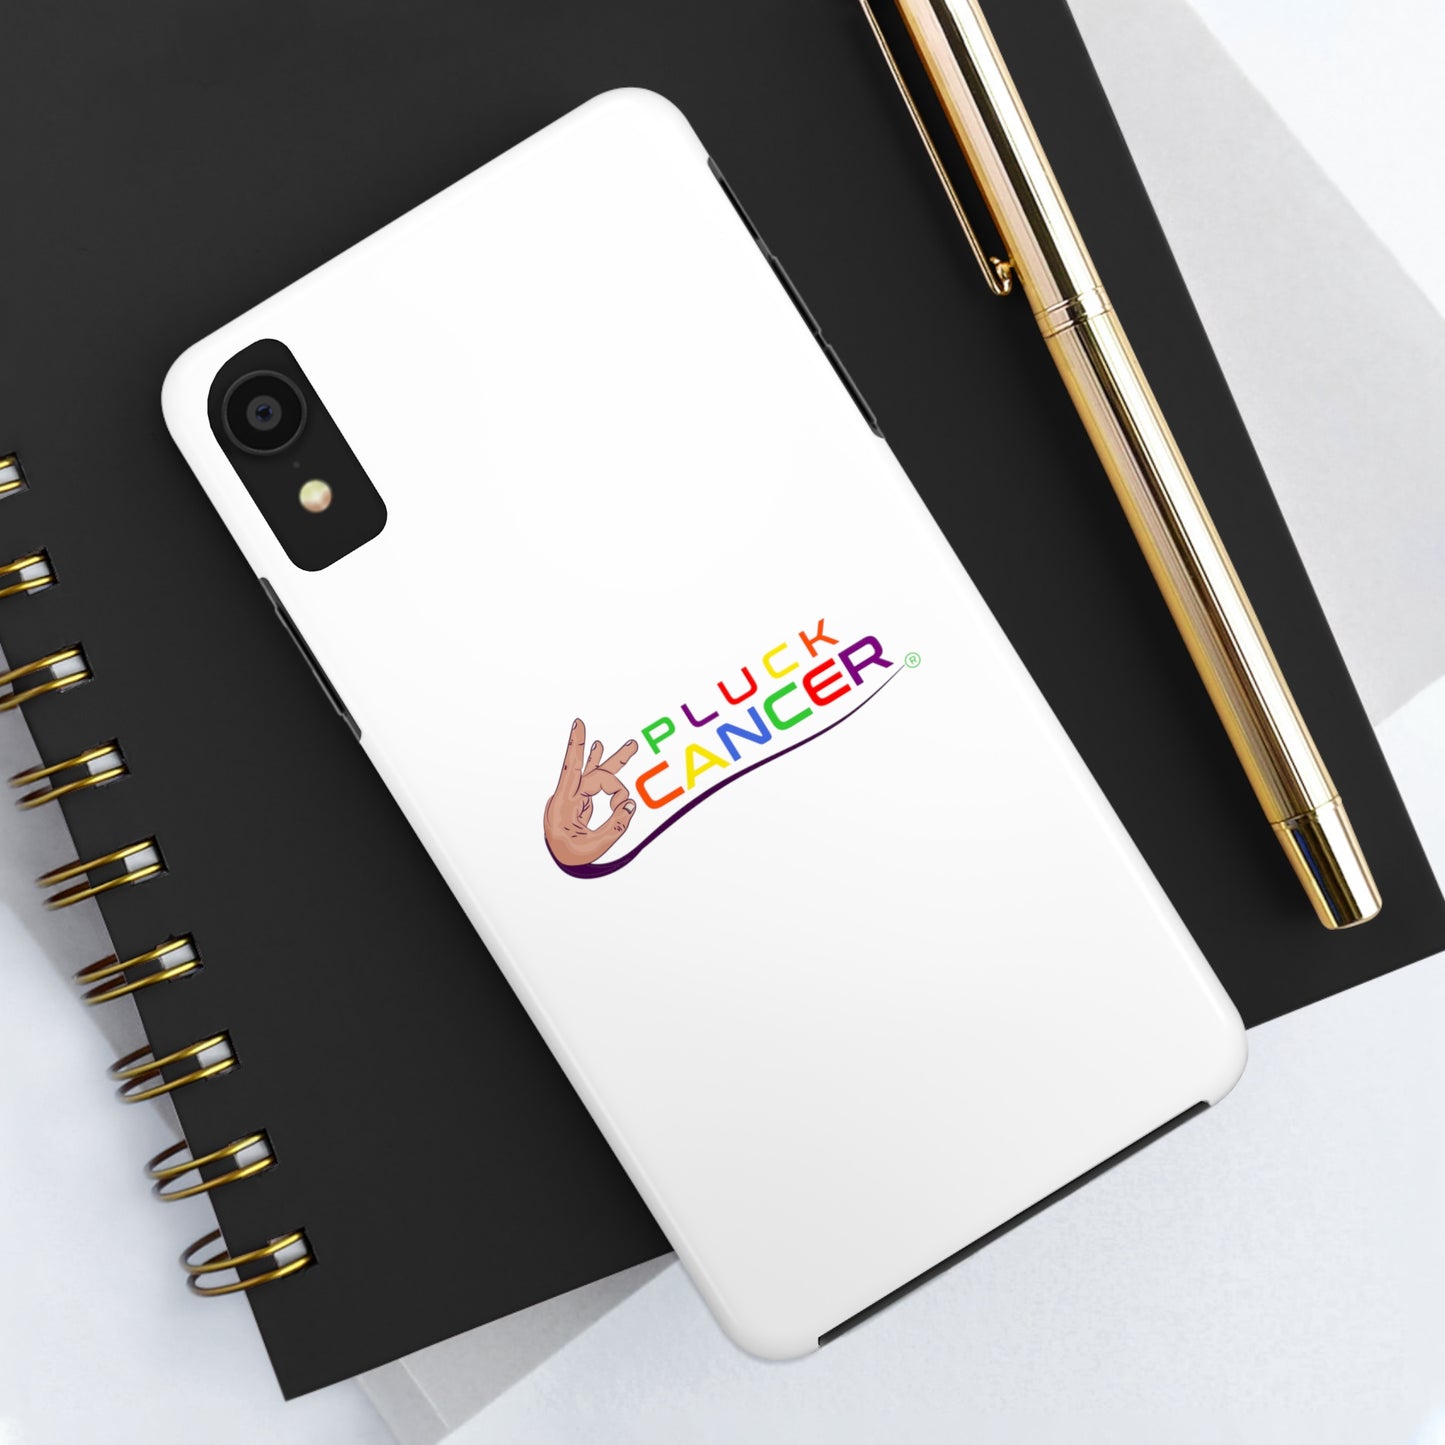 Tough Phone Cases- "PLUCK CANCER!"